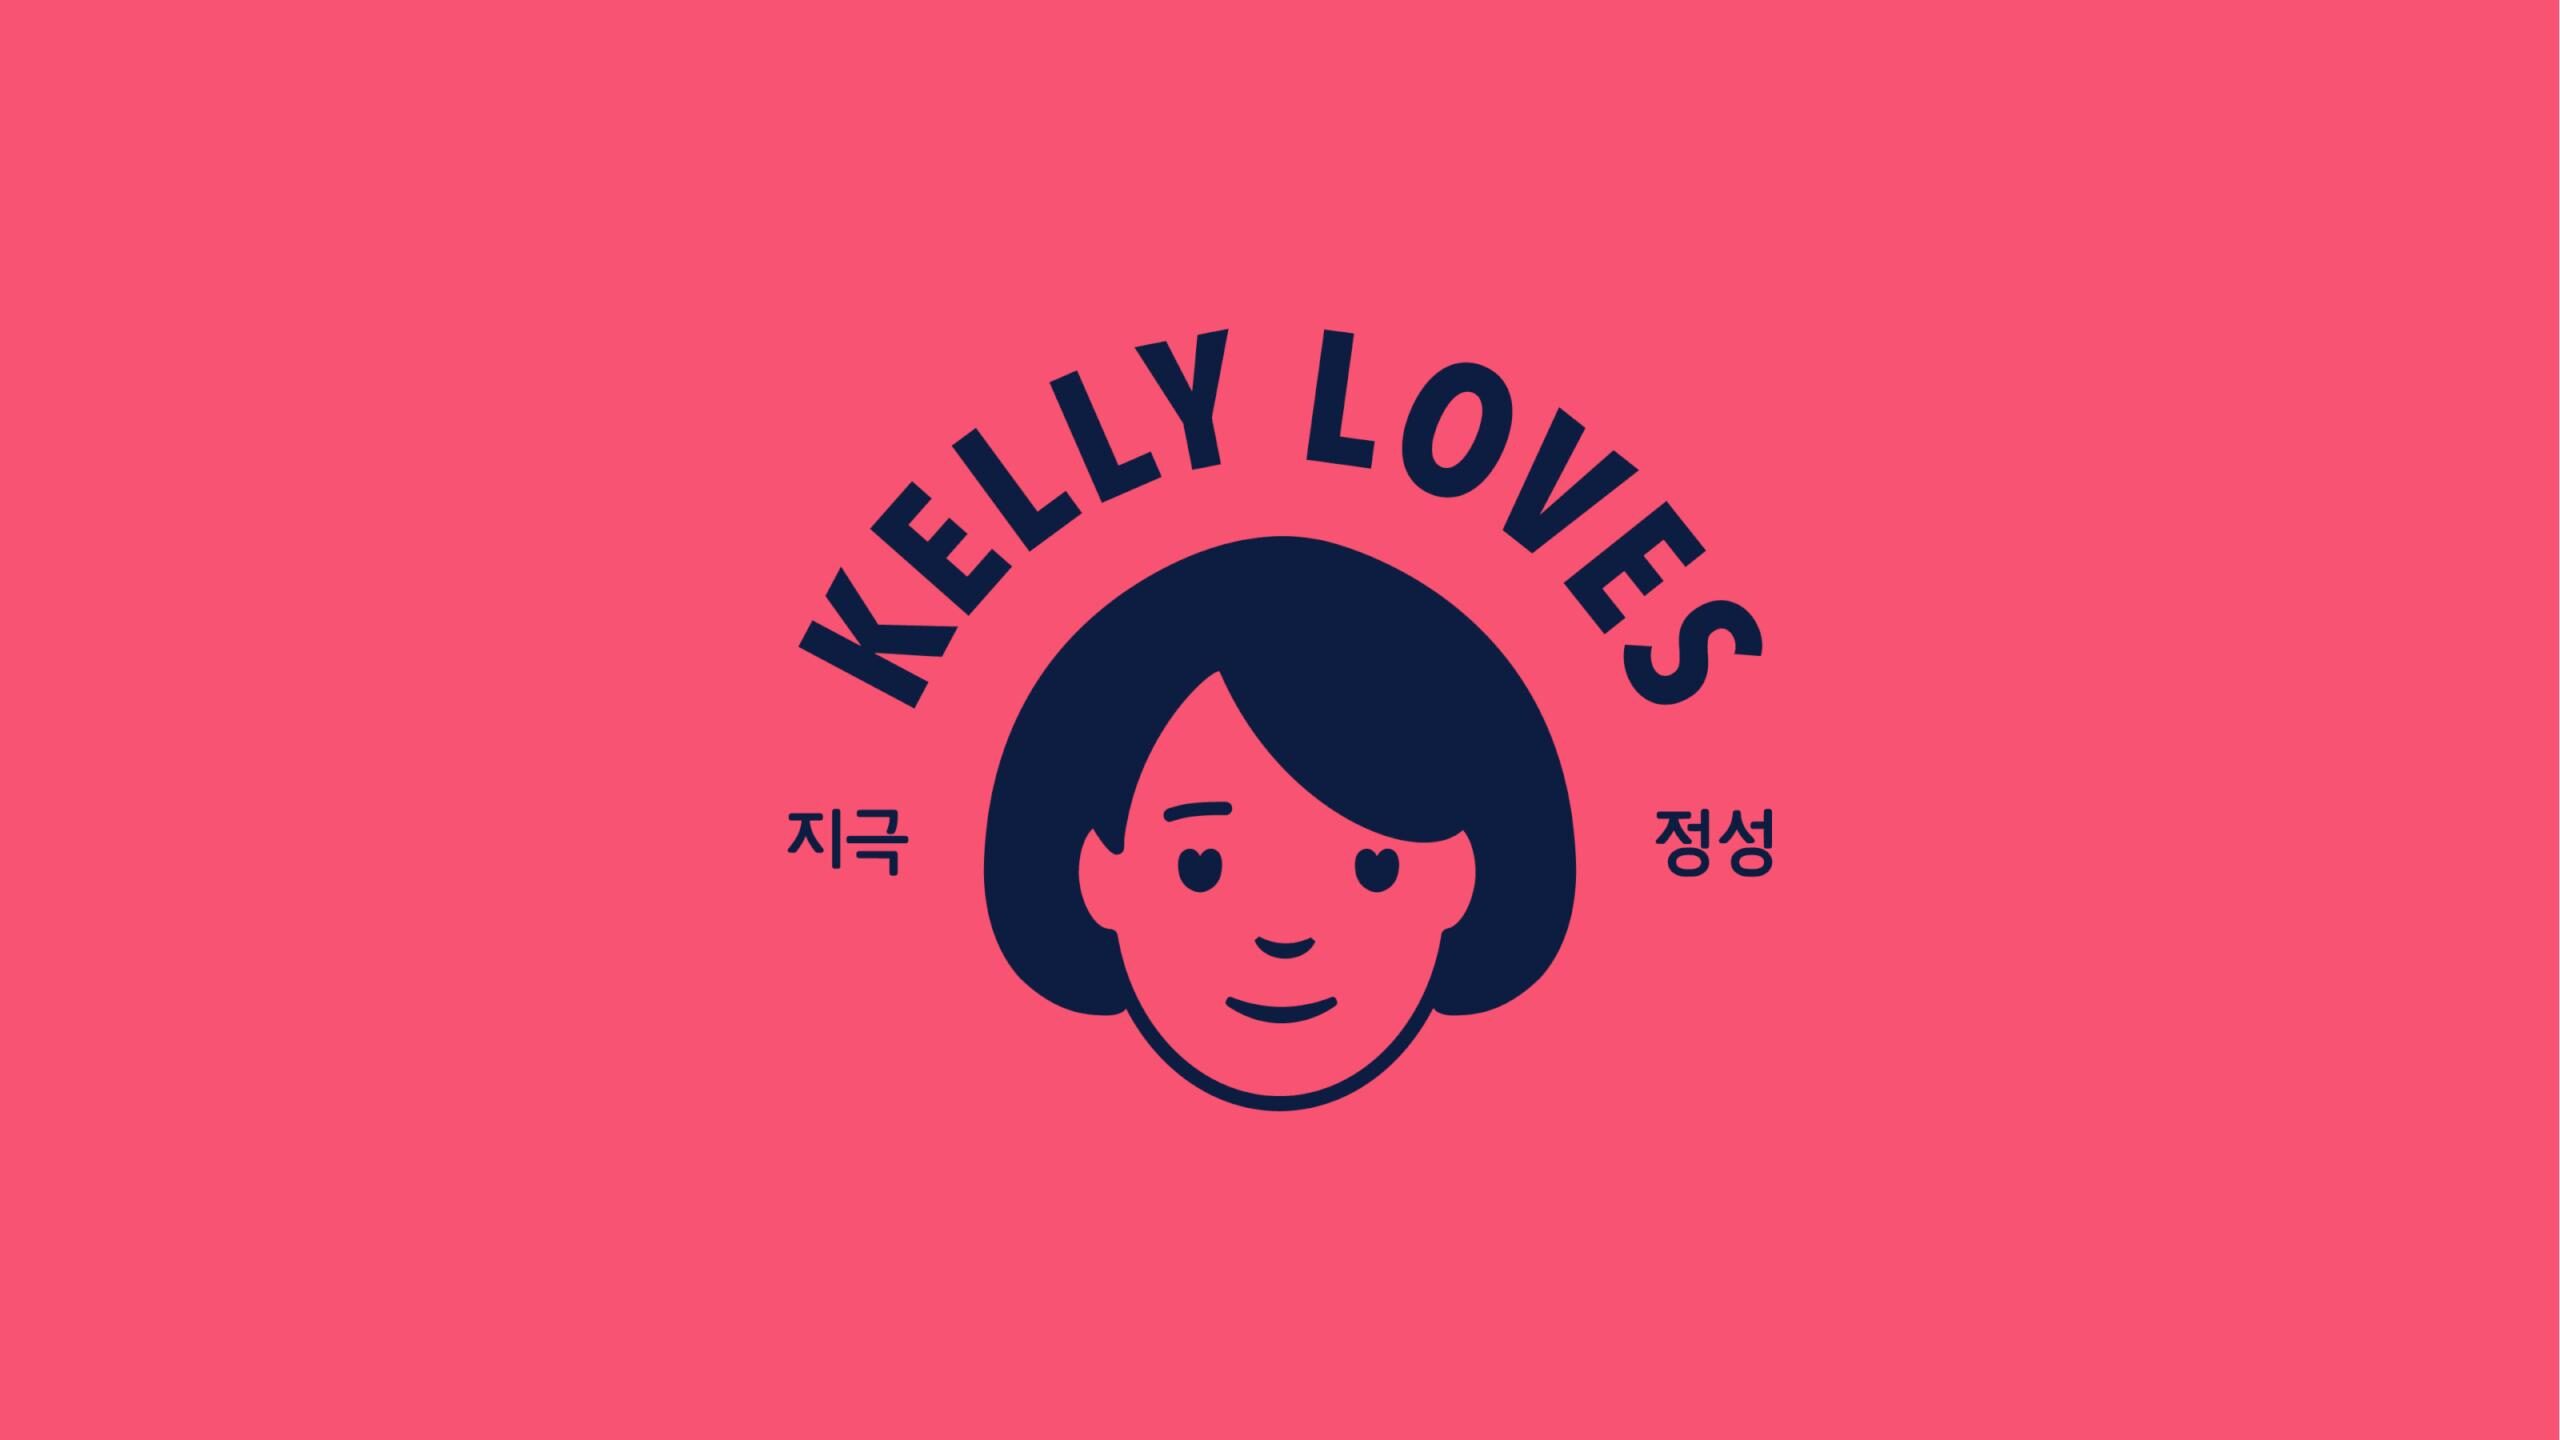 Food branding agency for Kelly Loves Products- Packaging Design